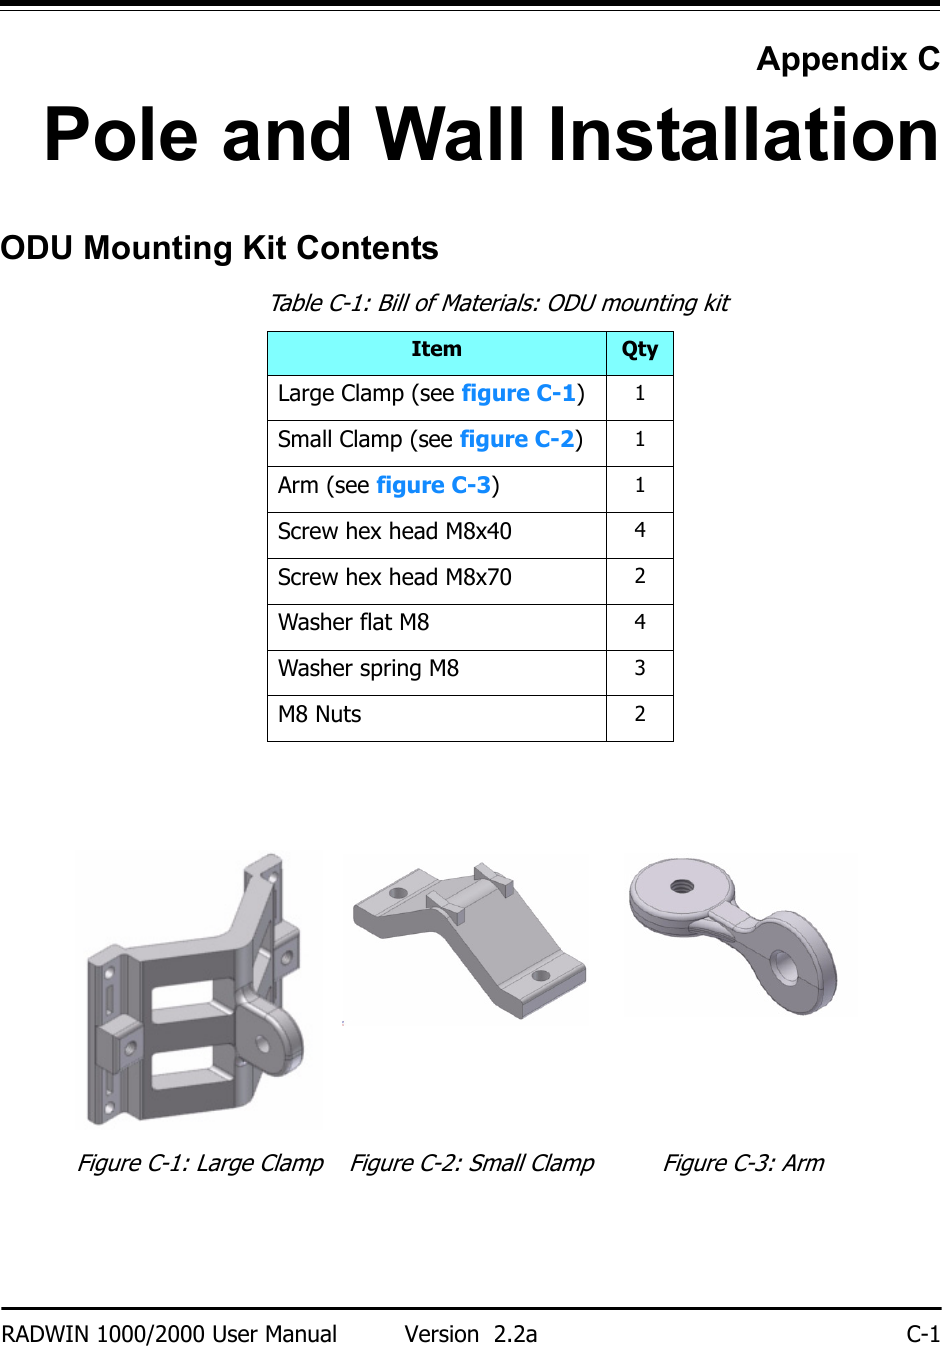 RADWIN 1000/2000 User Manual Version  2.2a C-1Appendix CPole and Wall InstallationODU Mounting Kit ContentsTable C-1: Bill of Materials: ODU mounting kitItem QtyLarge Clamp (see figure C-1)1Small Clamp (see figure C-2)1Arm (see figure C-3)1Screw hex head M8x40 4Screw hex head M8x70 2Washer flat M8 4Washer spring M8 3M8 Nuts 2Figure C-1: Large Clamp Figure C-2: Small Clamp Figure C-3: Arm